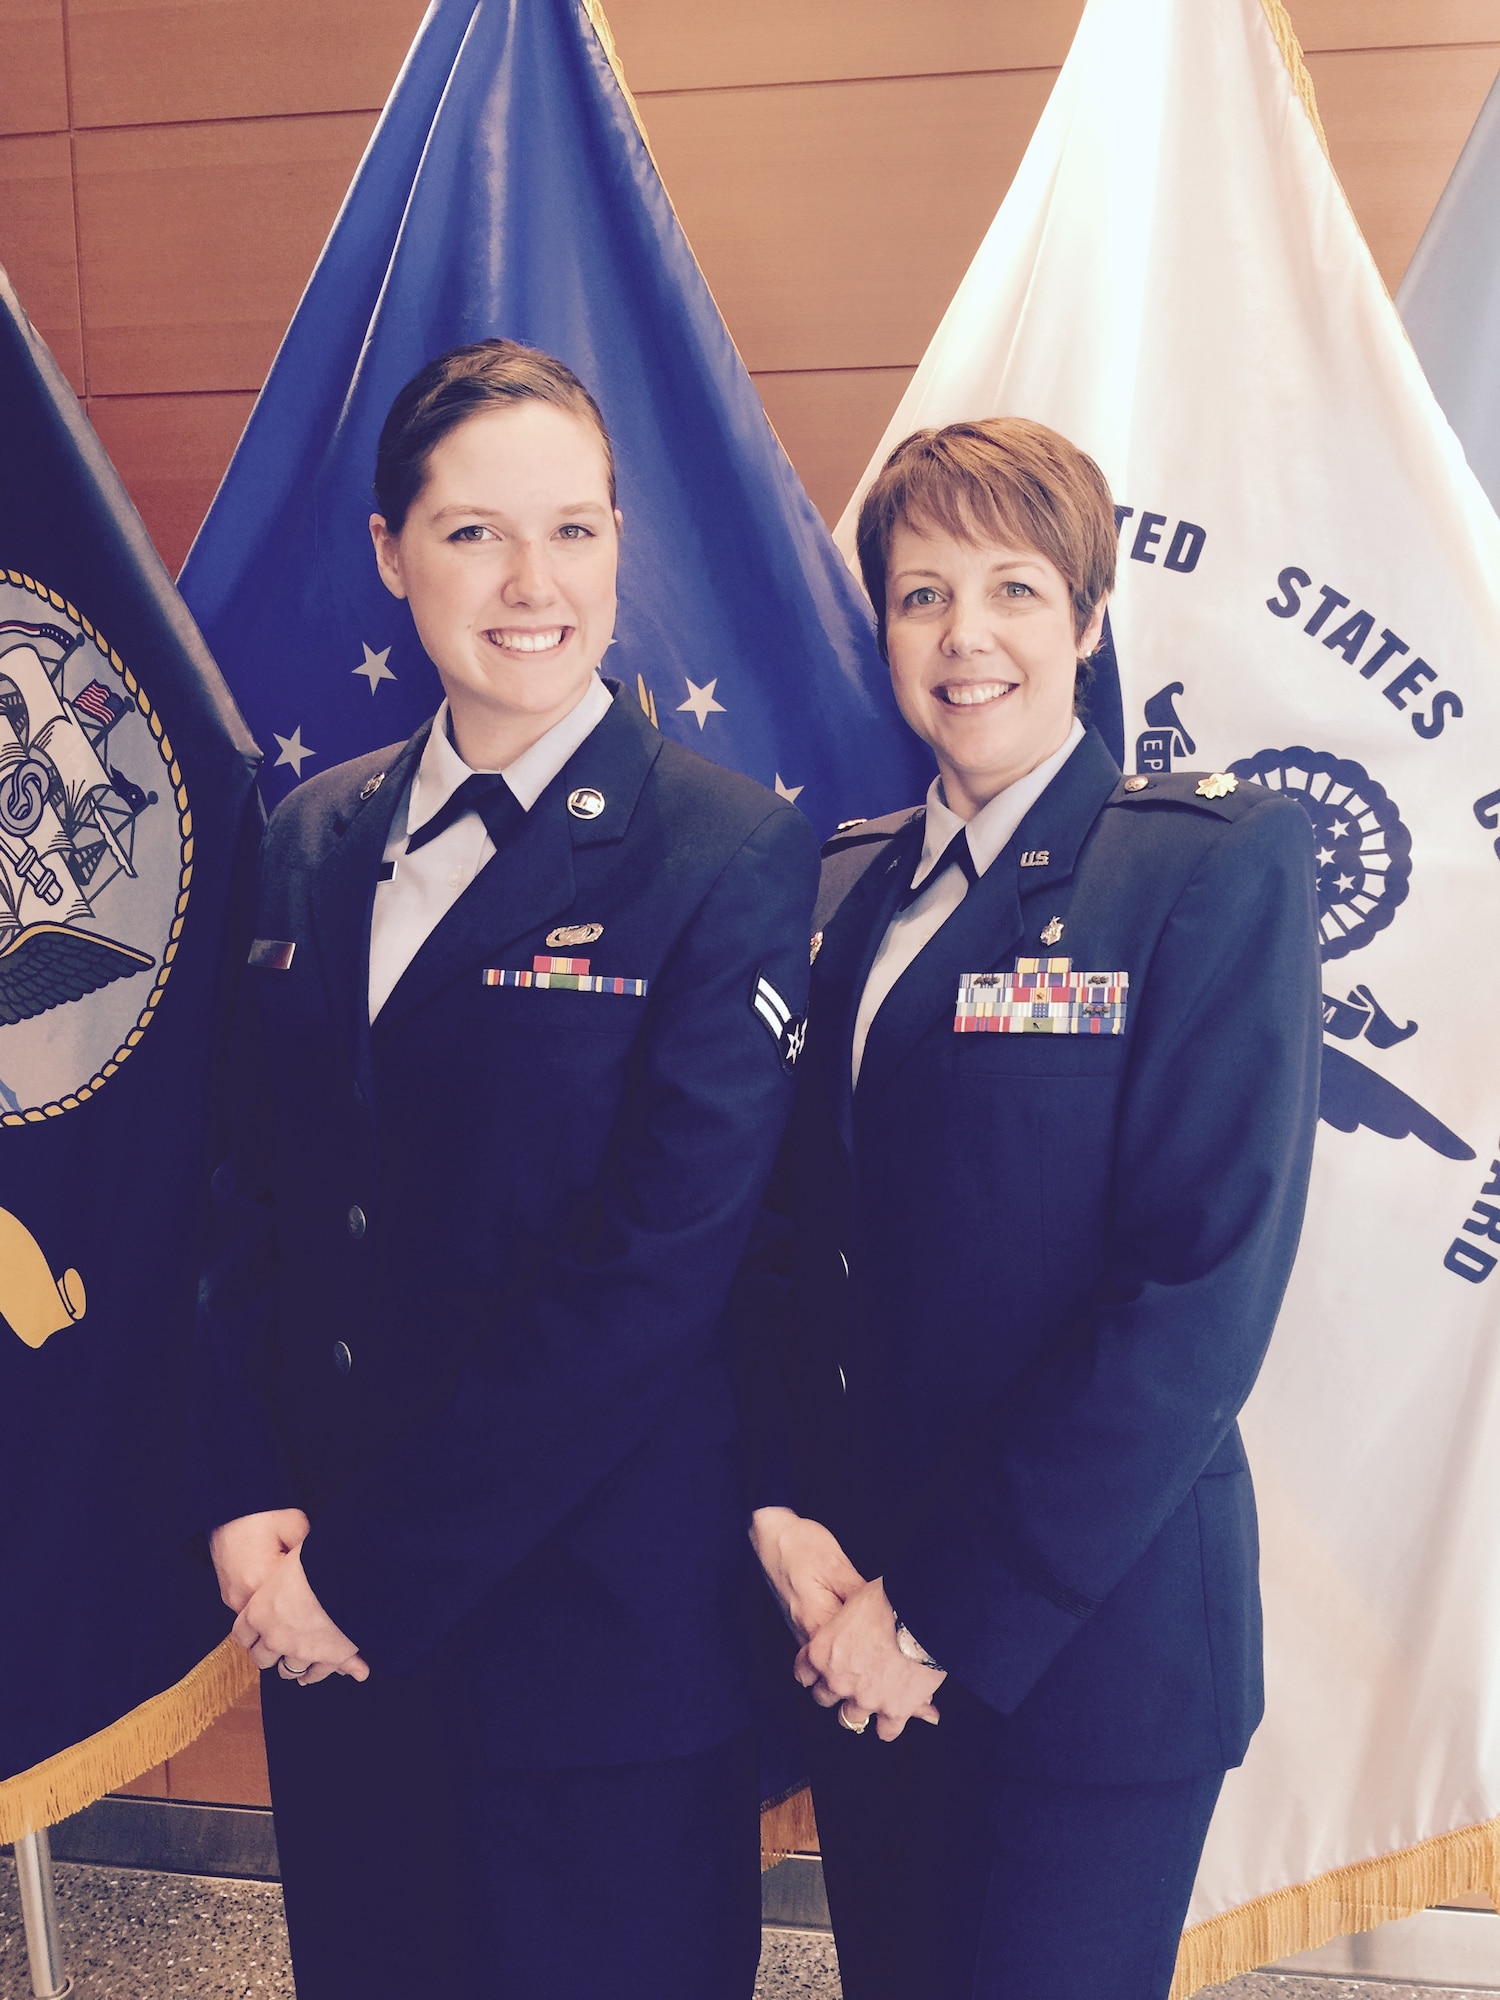 Then-Airman 1st Class Kara Watts and her mother, Maj. Tobie Wethington, attend the Air Force surgeon general’s promotion at Defense Health Headquarters in Falls Church, Va., in 2015. Watts, now a senior airman and a 66th Comptroller Squadron administration specialist, and Wethington, an information management information technology fellow at the Defense Information Systems Agency, are both active-duty Airmen. (Courtesy photo)